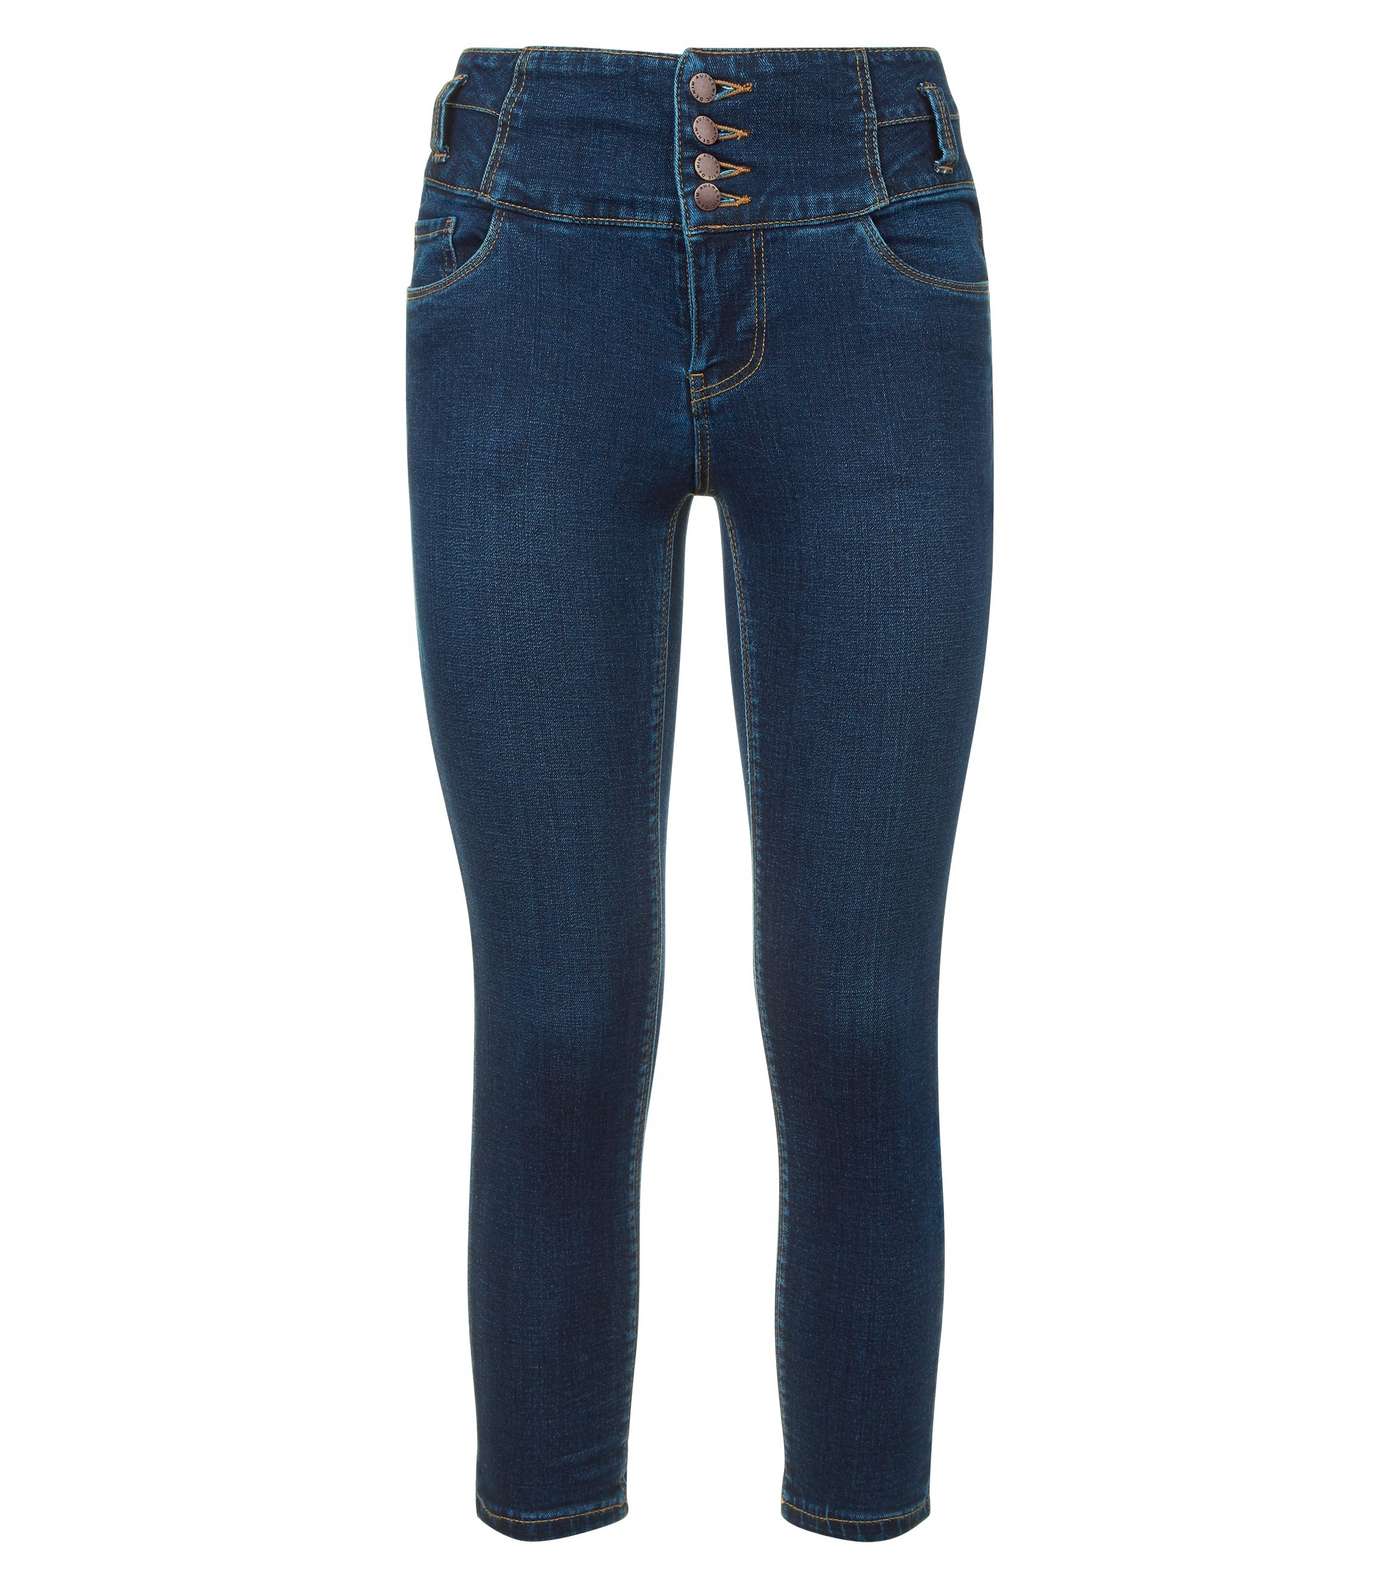 Petite Blue 26in High Waist Skinny Jeans Image 4